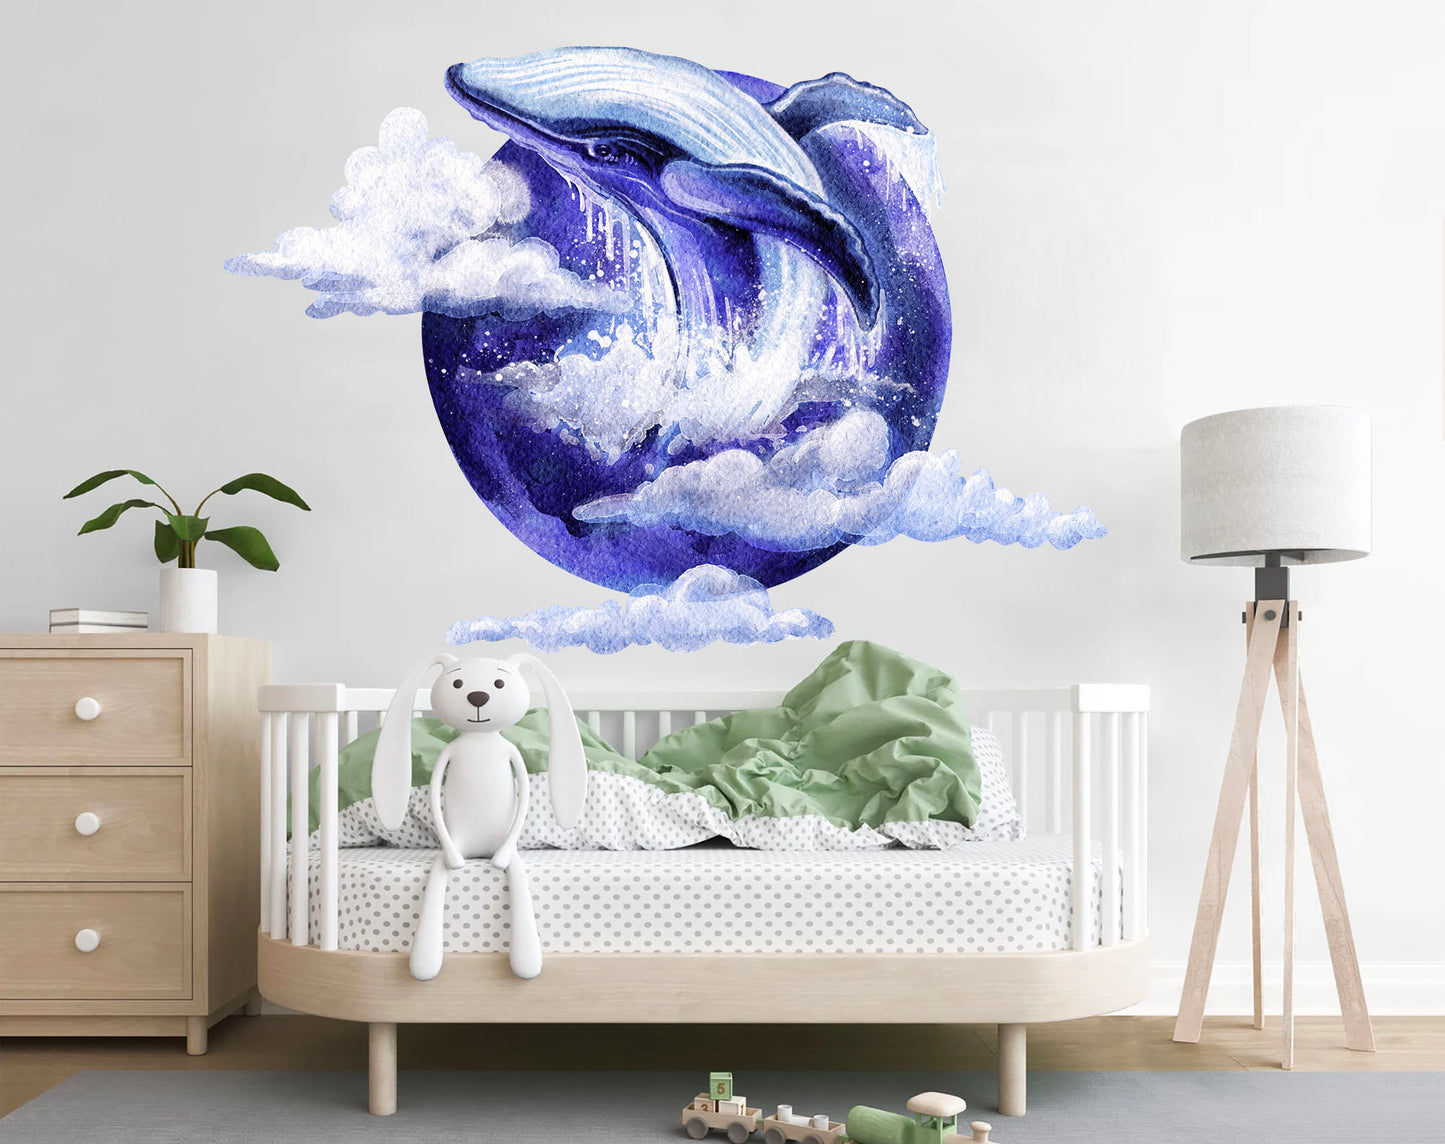 Dazzling Watercolor Blue Dolphin Leaping Wall Decal - Ideal for Kids Room Decor  -BR416